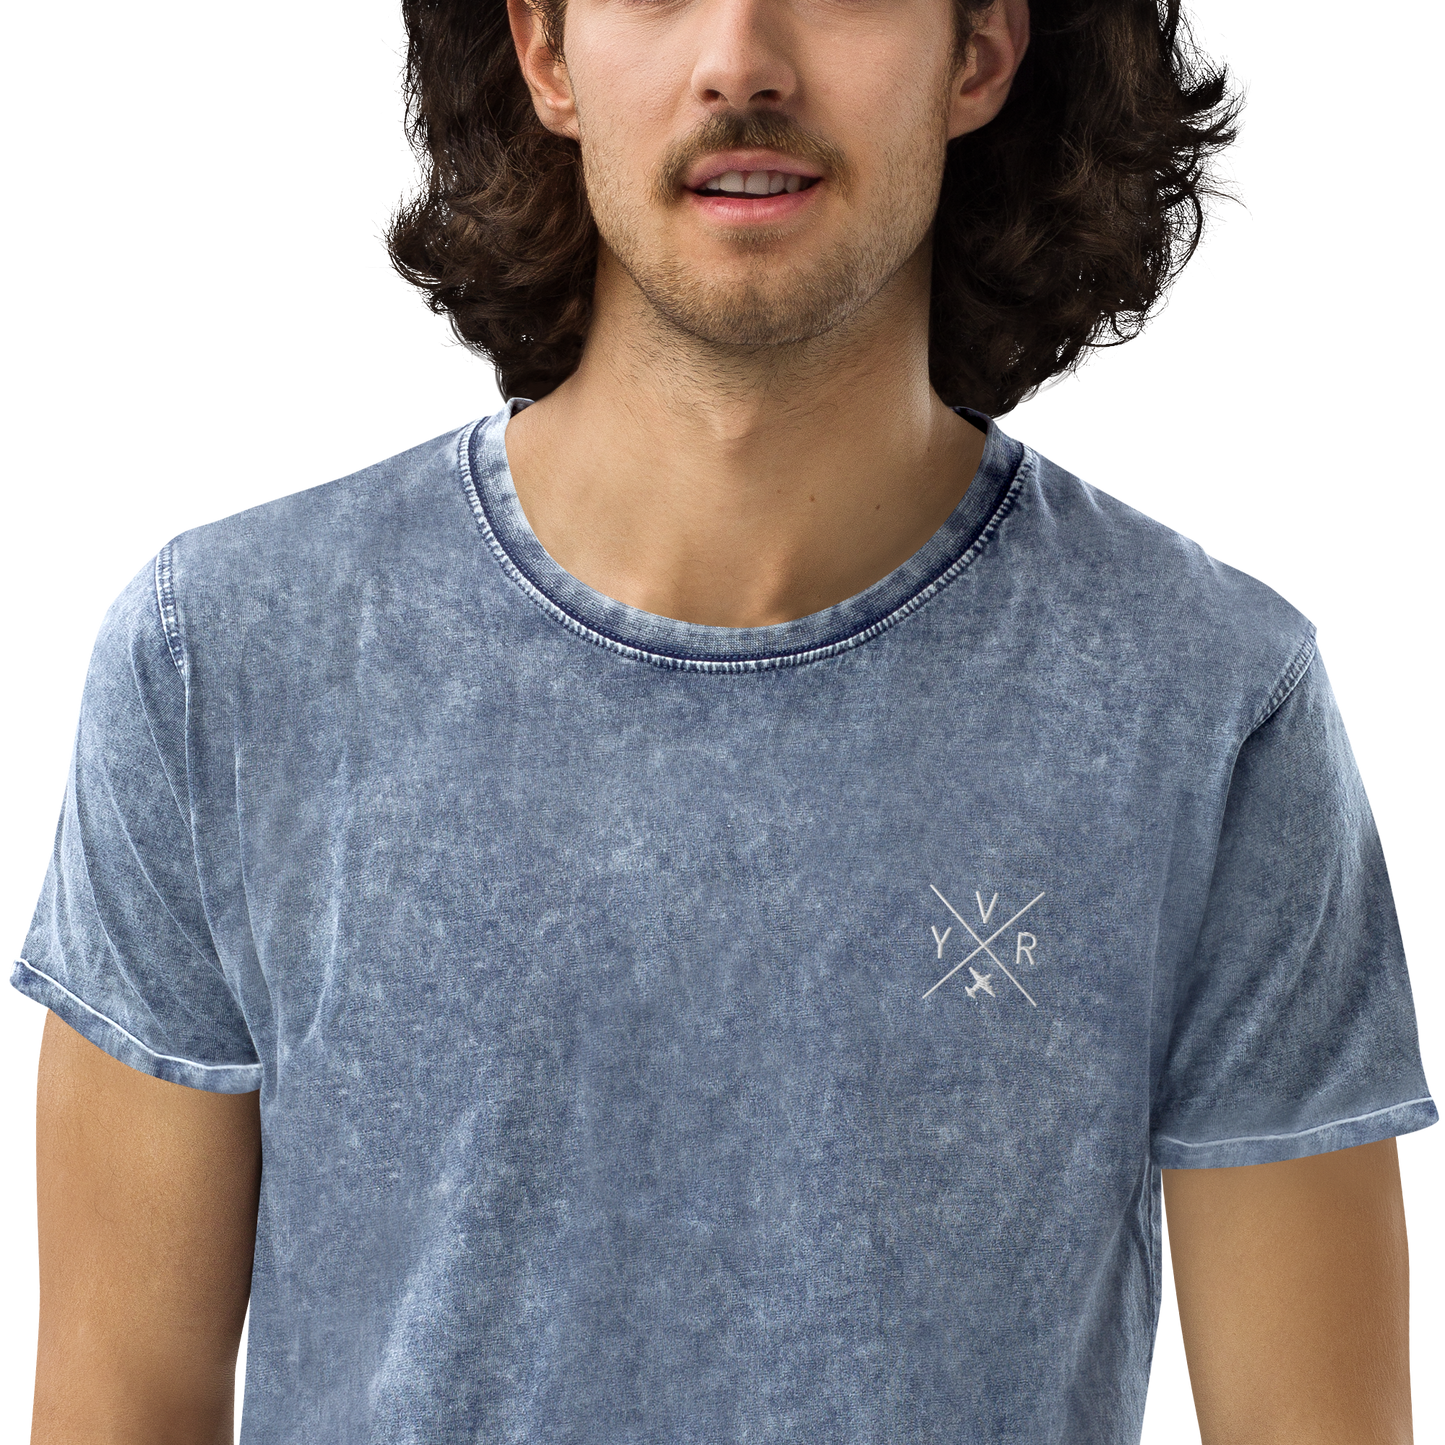 YHM Designs - YVR Vancouver Denim T-Shirt - Crossed-X Design with Airport Code and Vintage Propliner - White Embroidery - Image 12